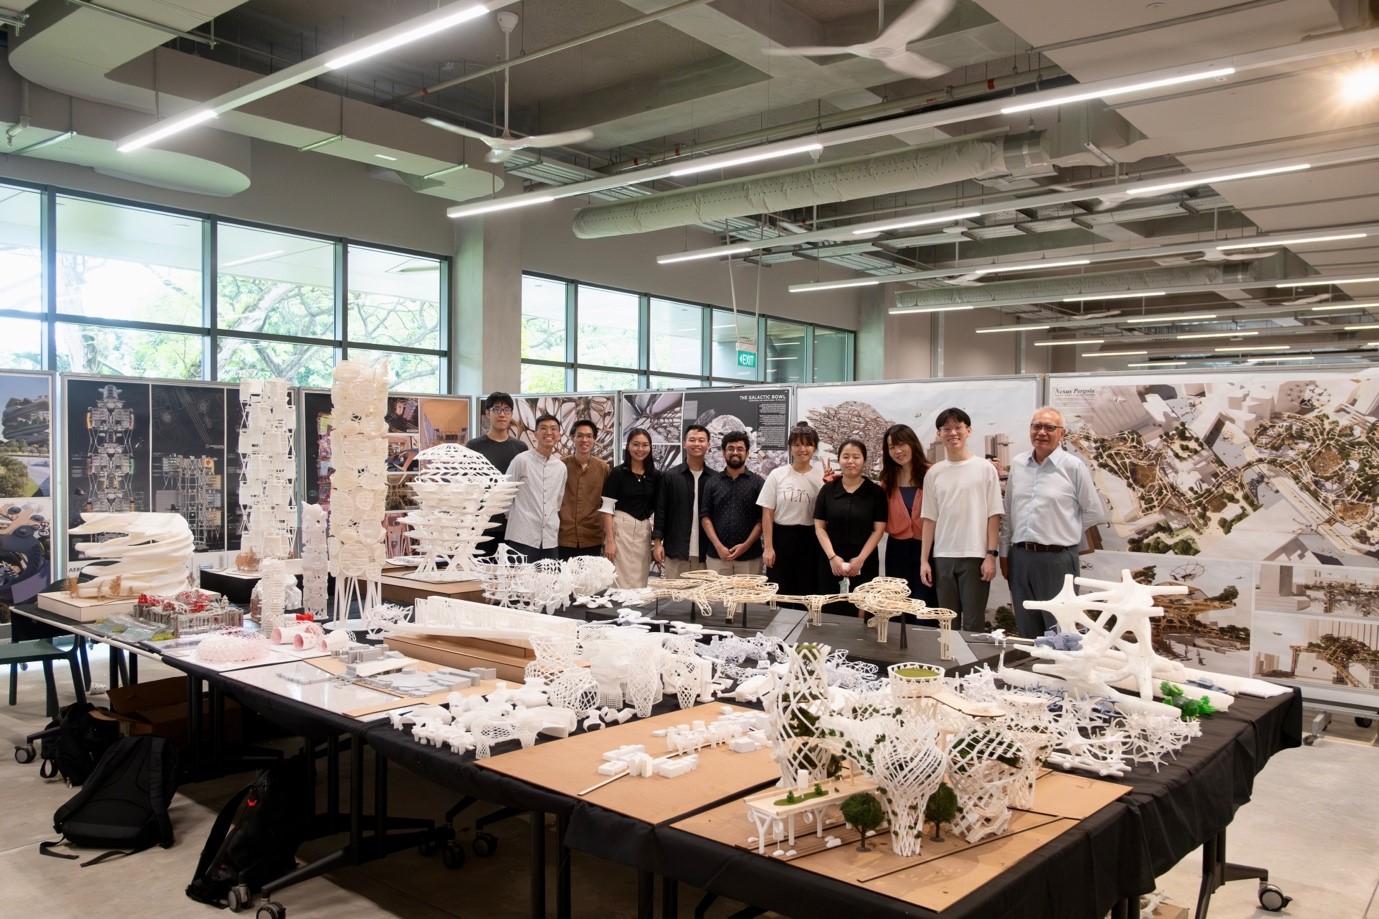 Ryan (second from right) at his end-of-semester architectural presentation and critique session at the studio